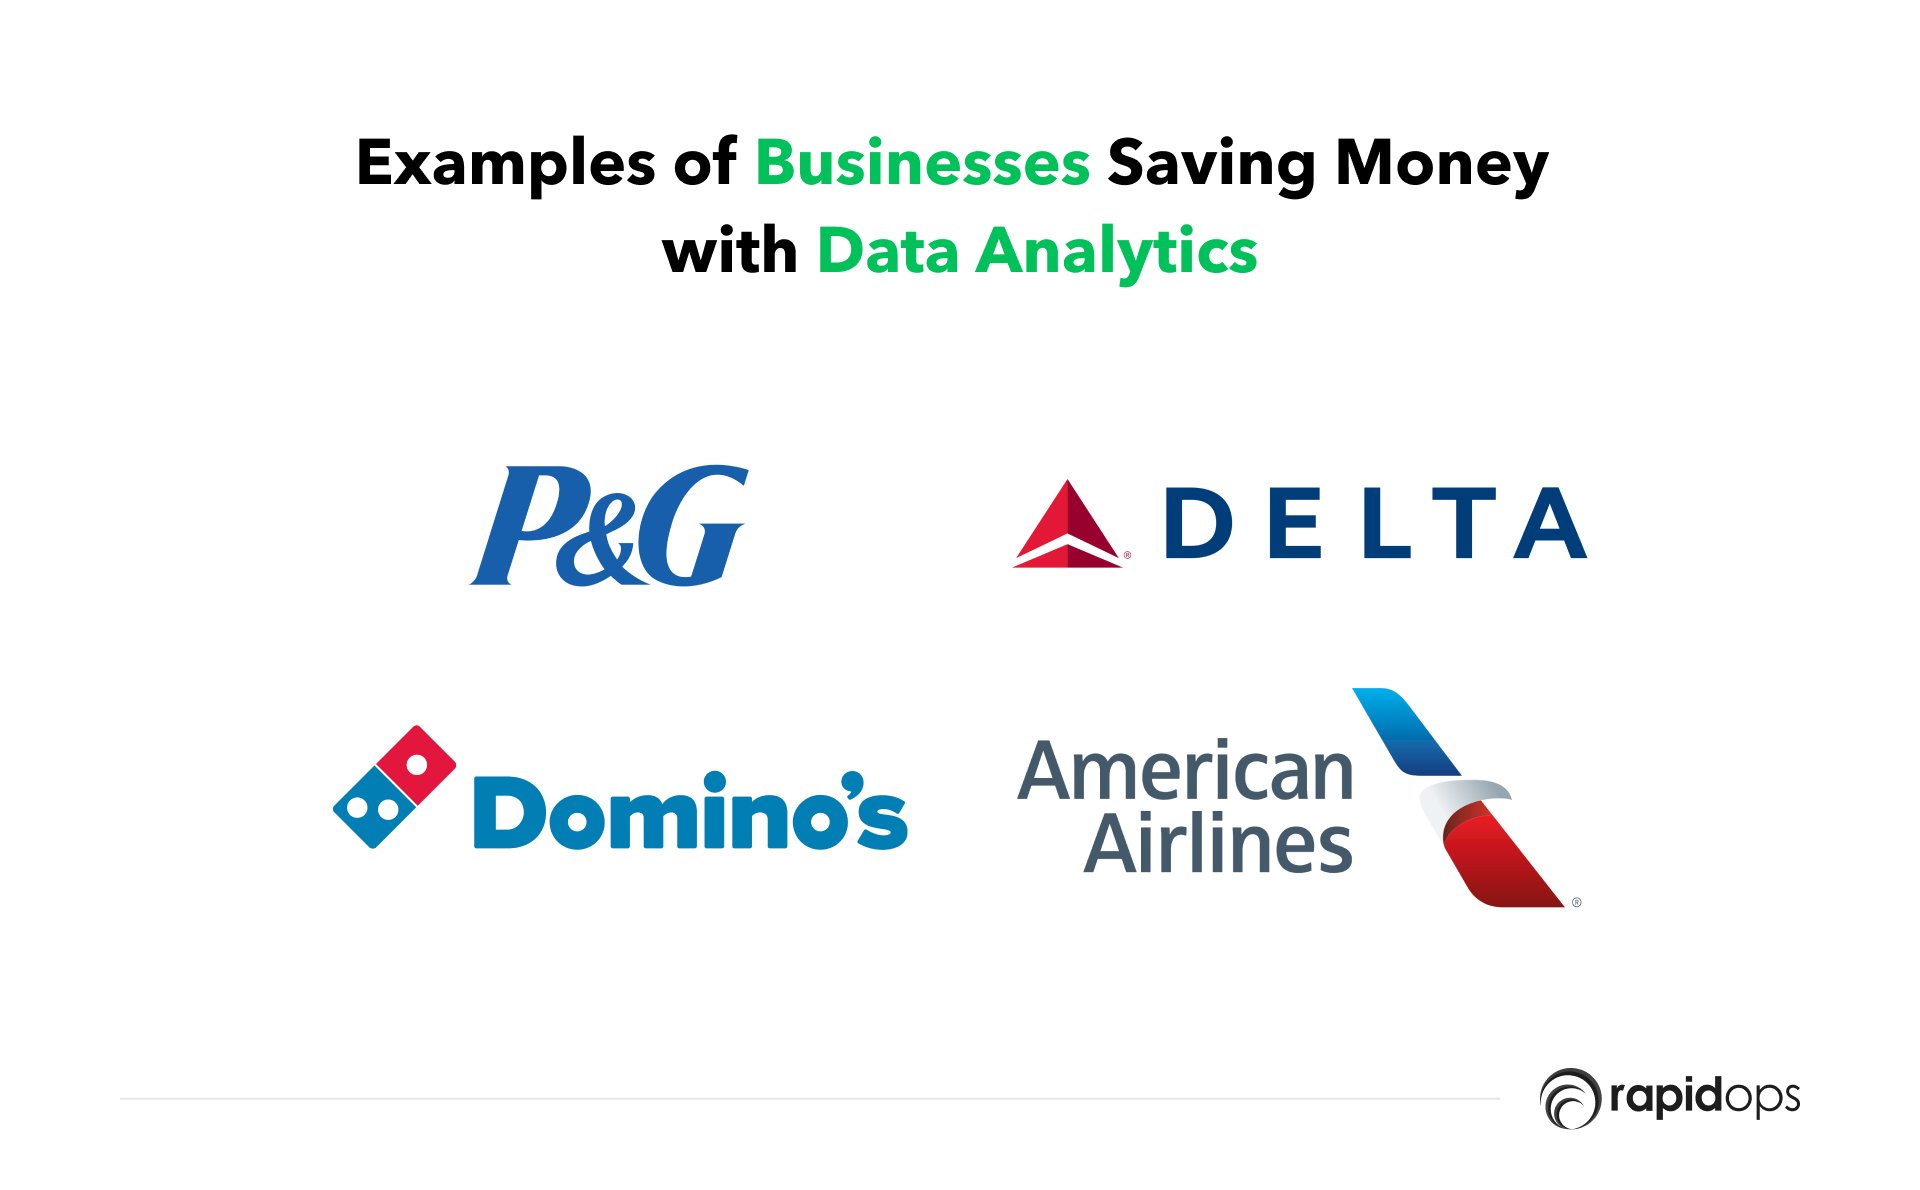 Examples of Businesses Saving Money with Data Analytics